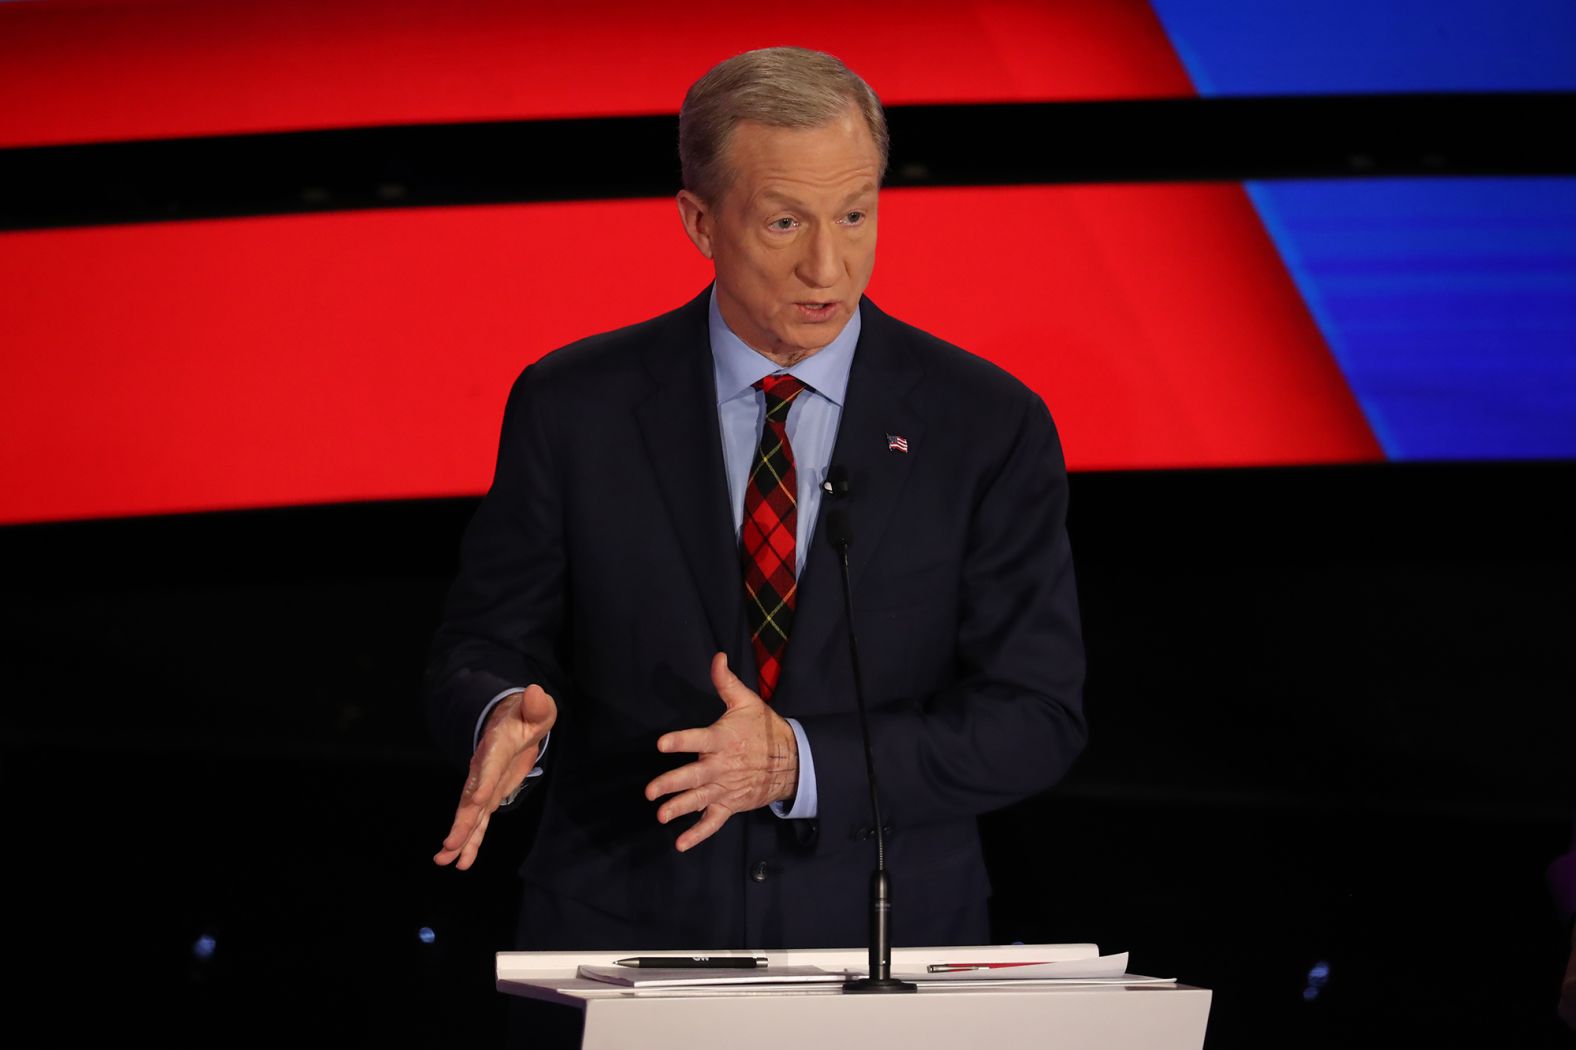 Steyer, a former hedge-fund manager who has spent more than $100 million on television ads, barely made Tuesday's debate. During the debate, he said he would <a href="index.php?page=&url=https%3A%2F%2Fwww.cnn.com%2Fpolitics%2Flive-news%2Fjanuary-democratic-debate-live%2Fh_c4f7cfd2fd5e1cb26233a56f637a387e" target="_blank">declare a state of emergency on climate change.</a>